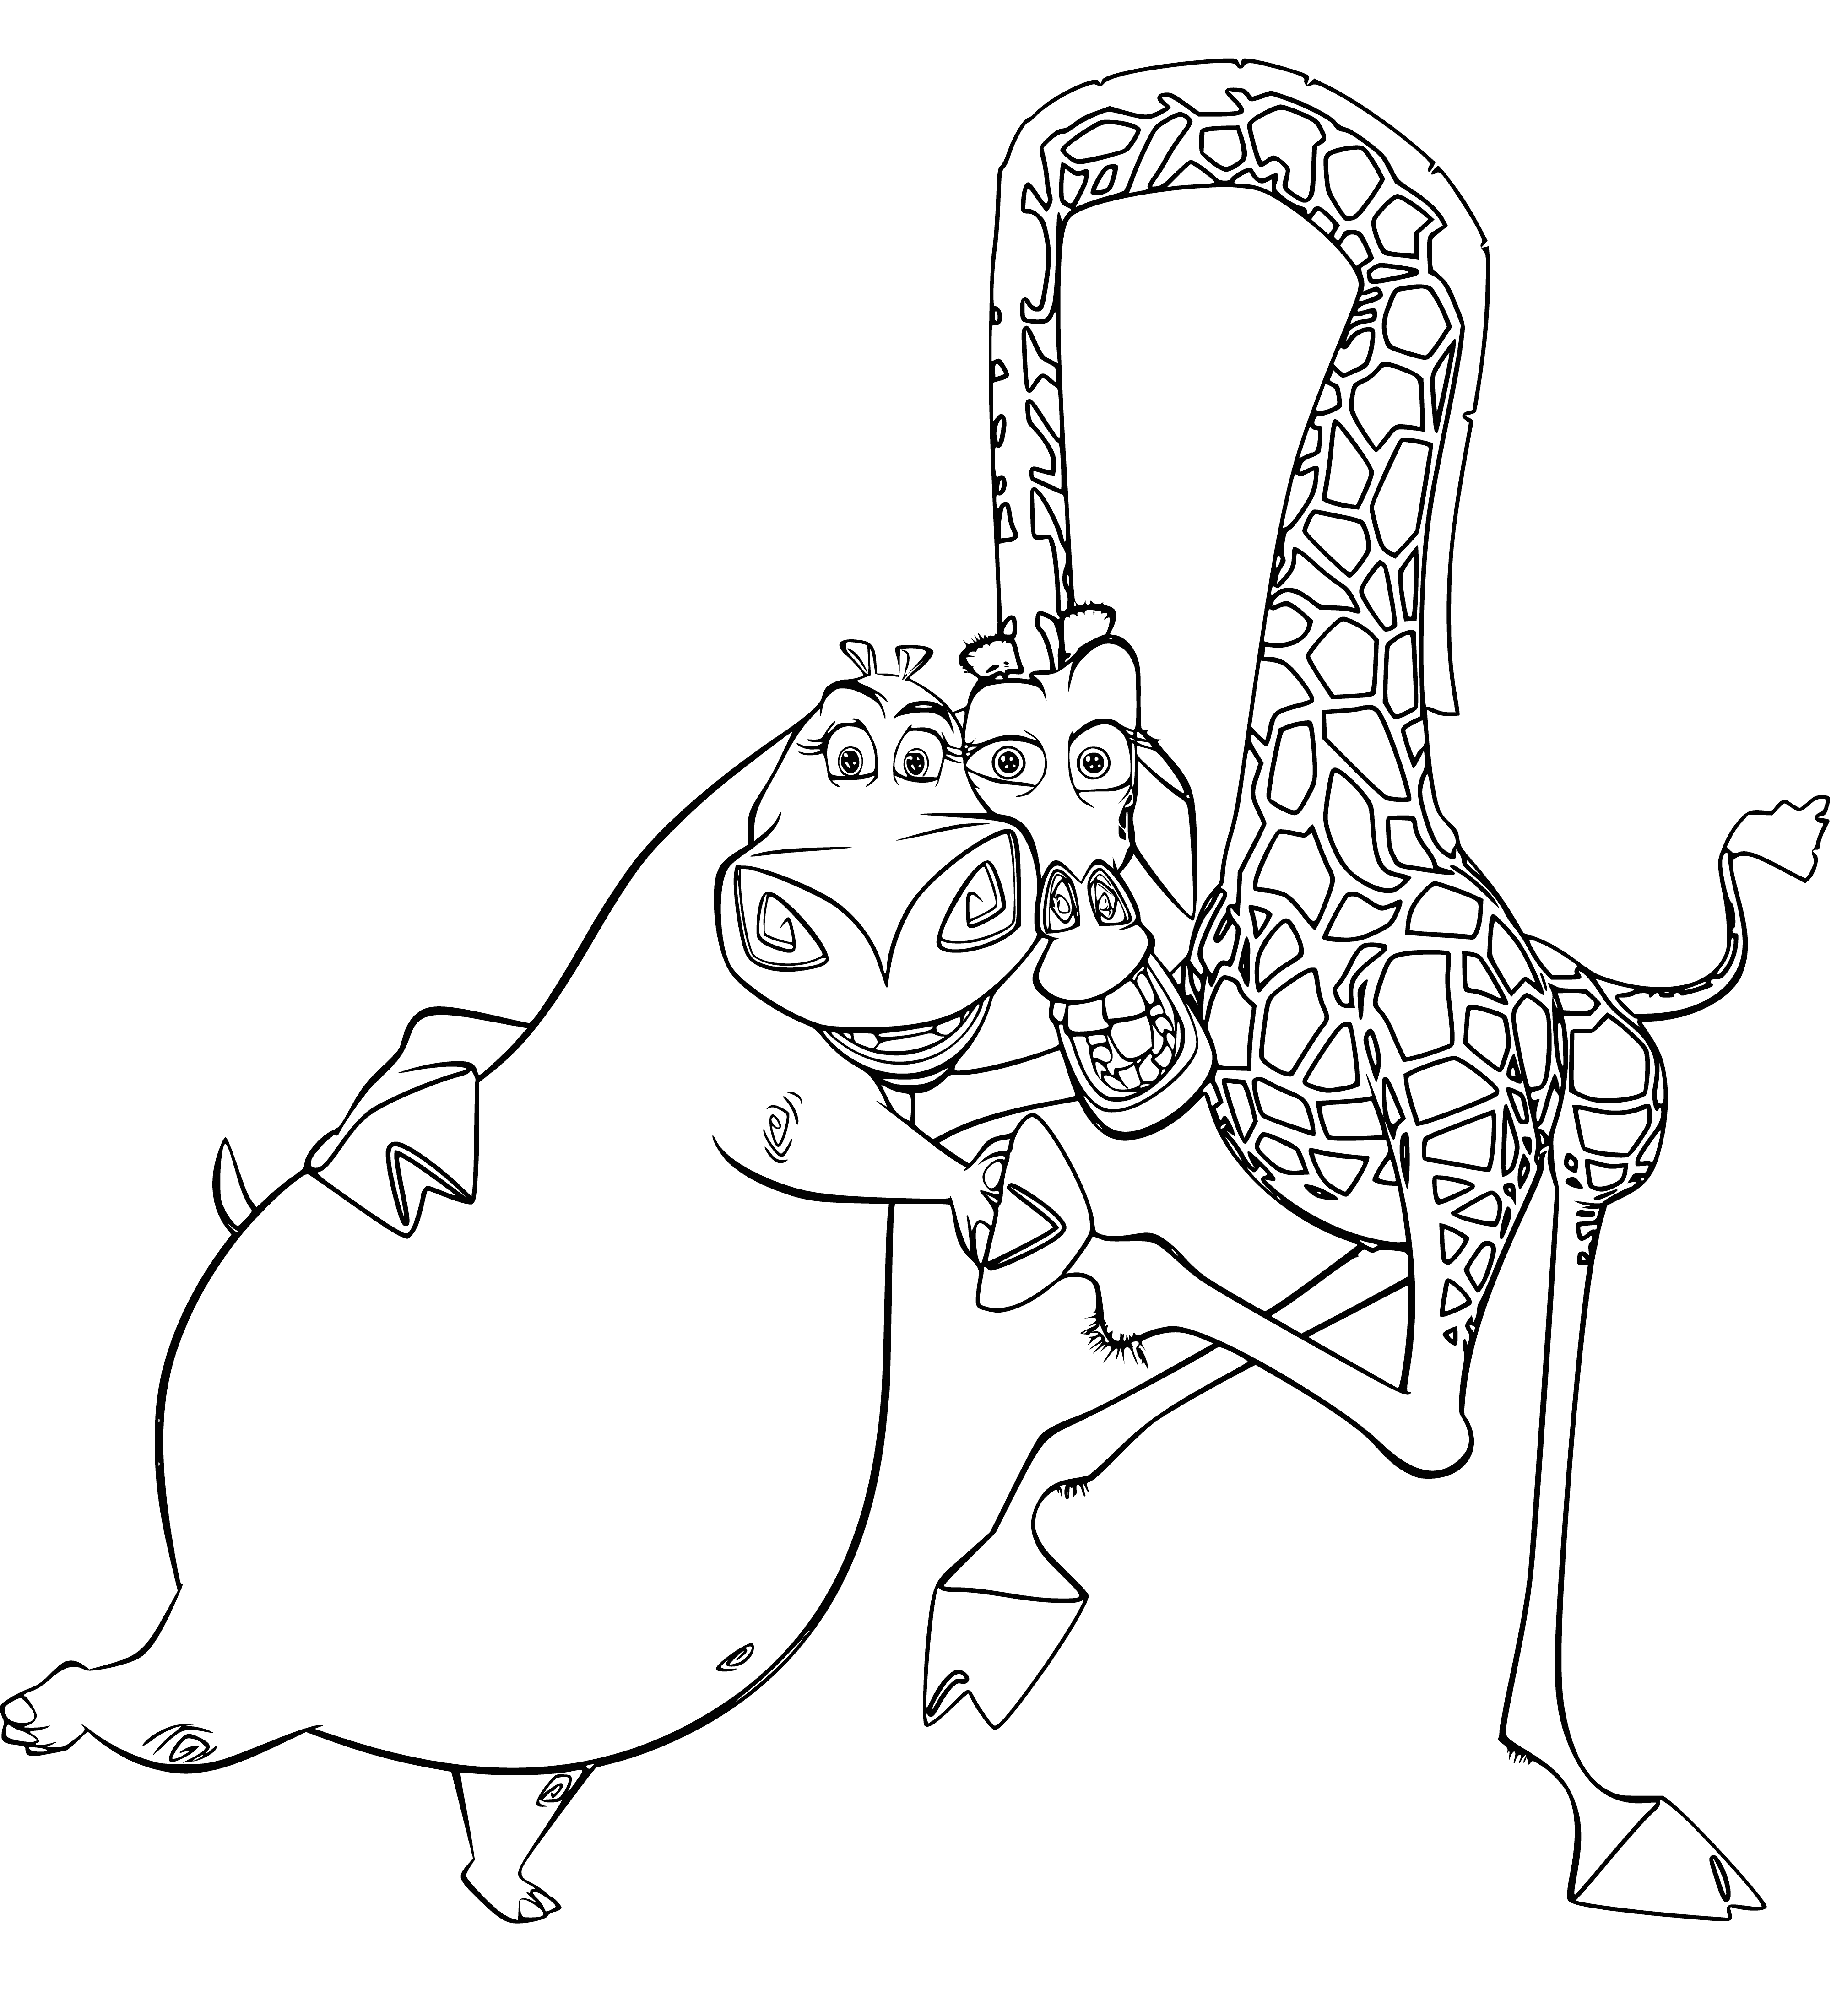 Gloria and Melman coloring page